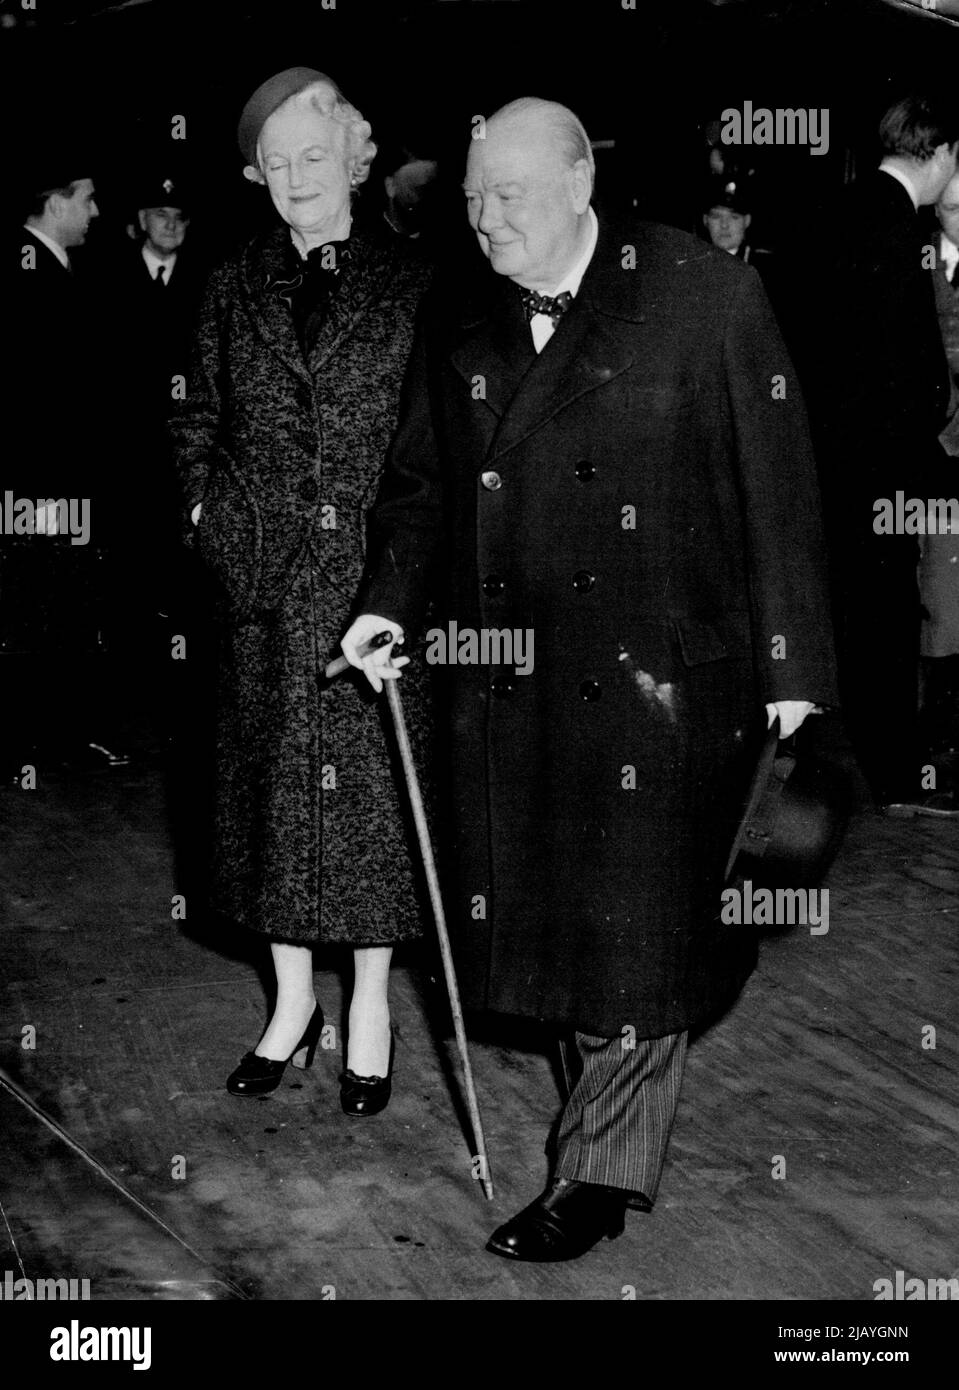 The Premier is Home Again : The Prime Minister and Mrs. Churchill on arrival at Waterloc Station, London, this morning. Returned from his visit to Washington and his short holiday in Jamaica, Mr. Winston Churchill arrived in London today (Thursday) by best train from Southampton, where he disembarked from the Cunarder 'Queen Mary' this morning. January 29, 1953. (Photo by Reuterphoto). Stock Photo